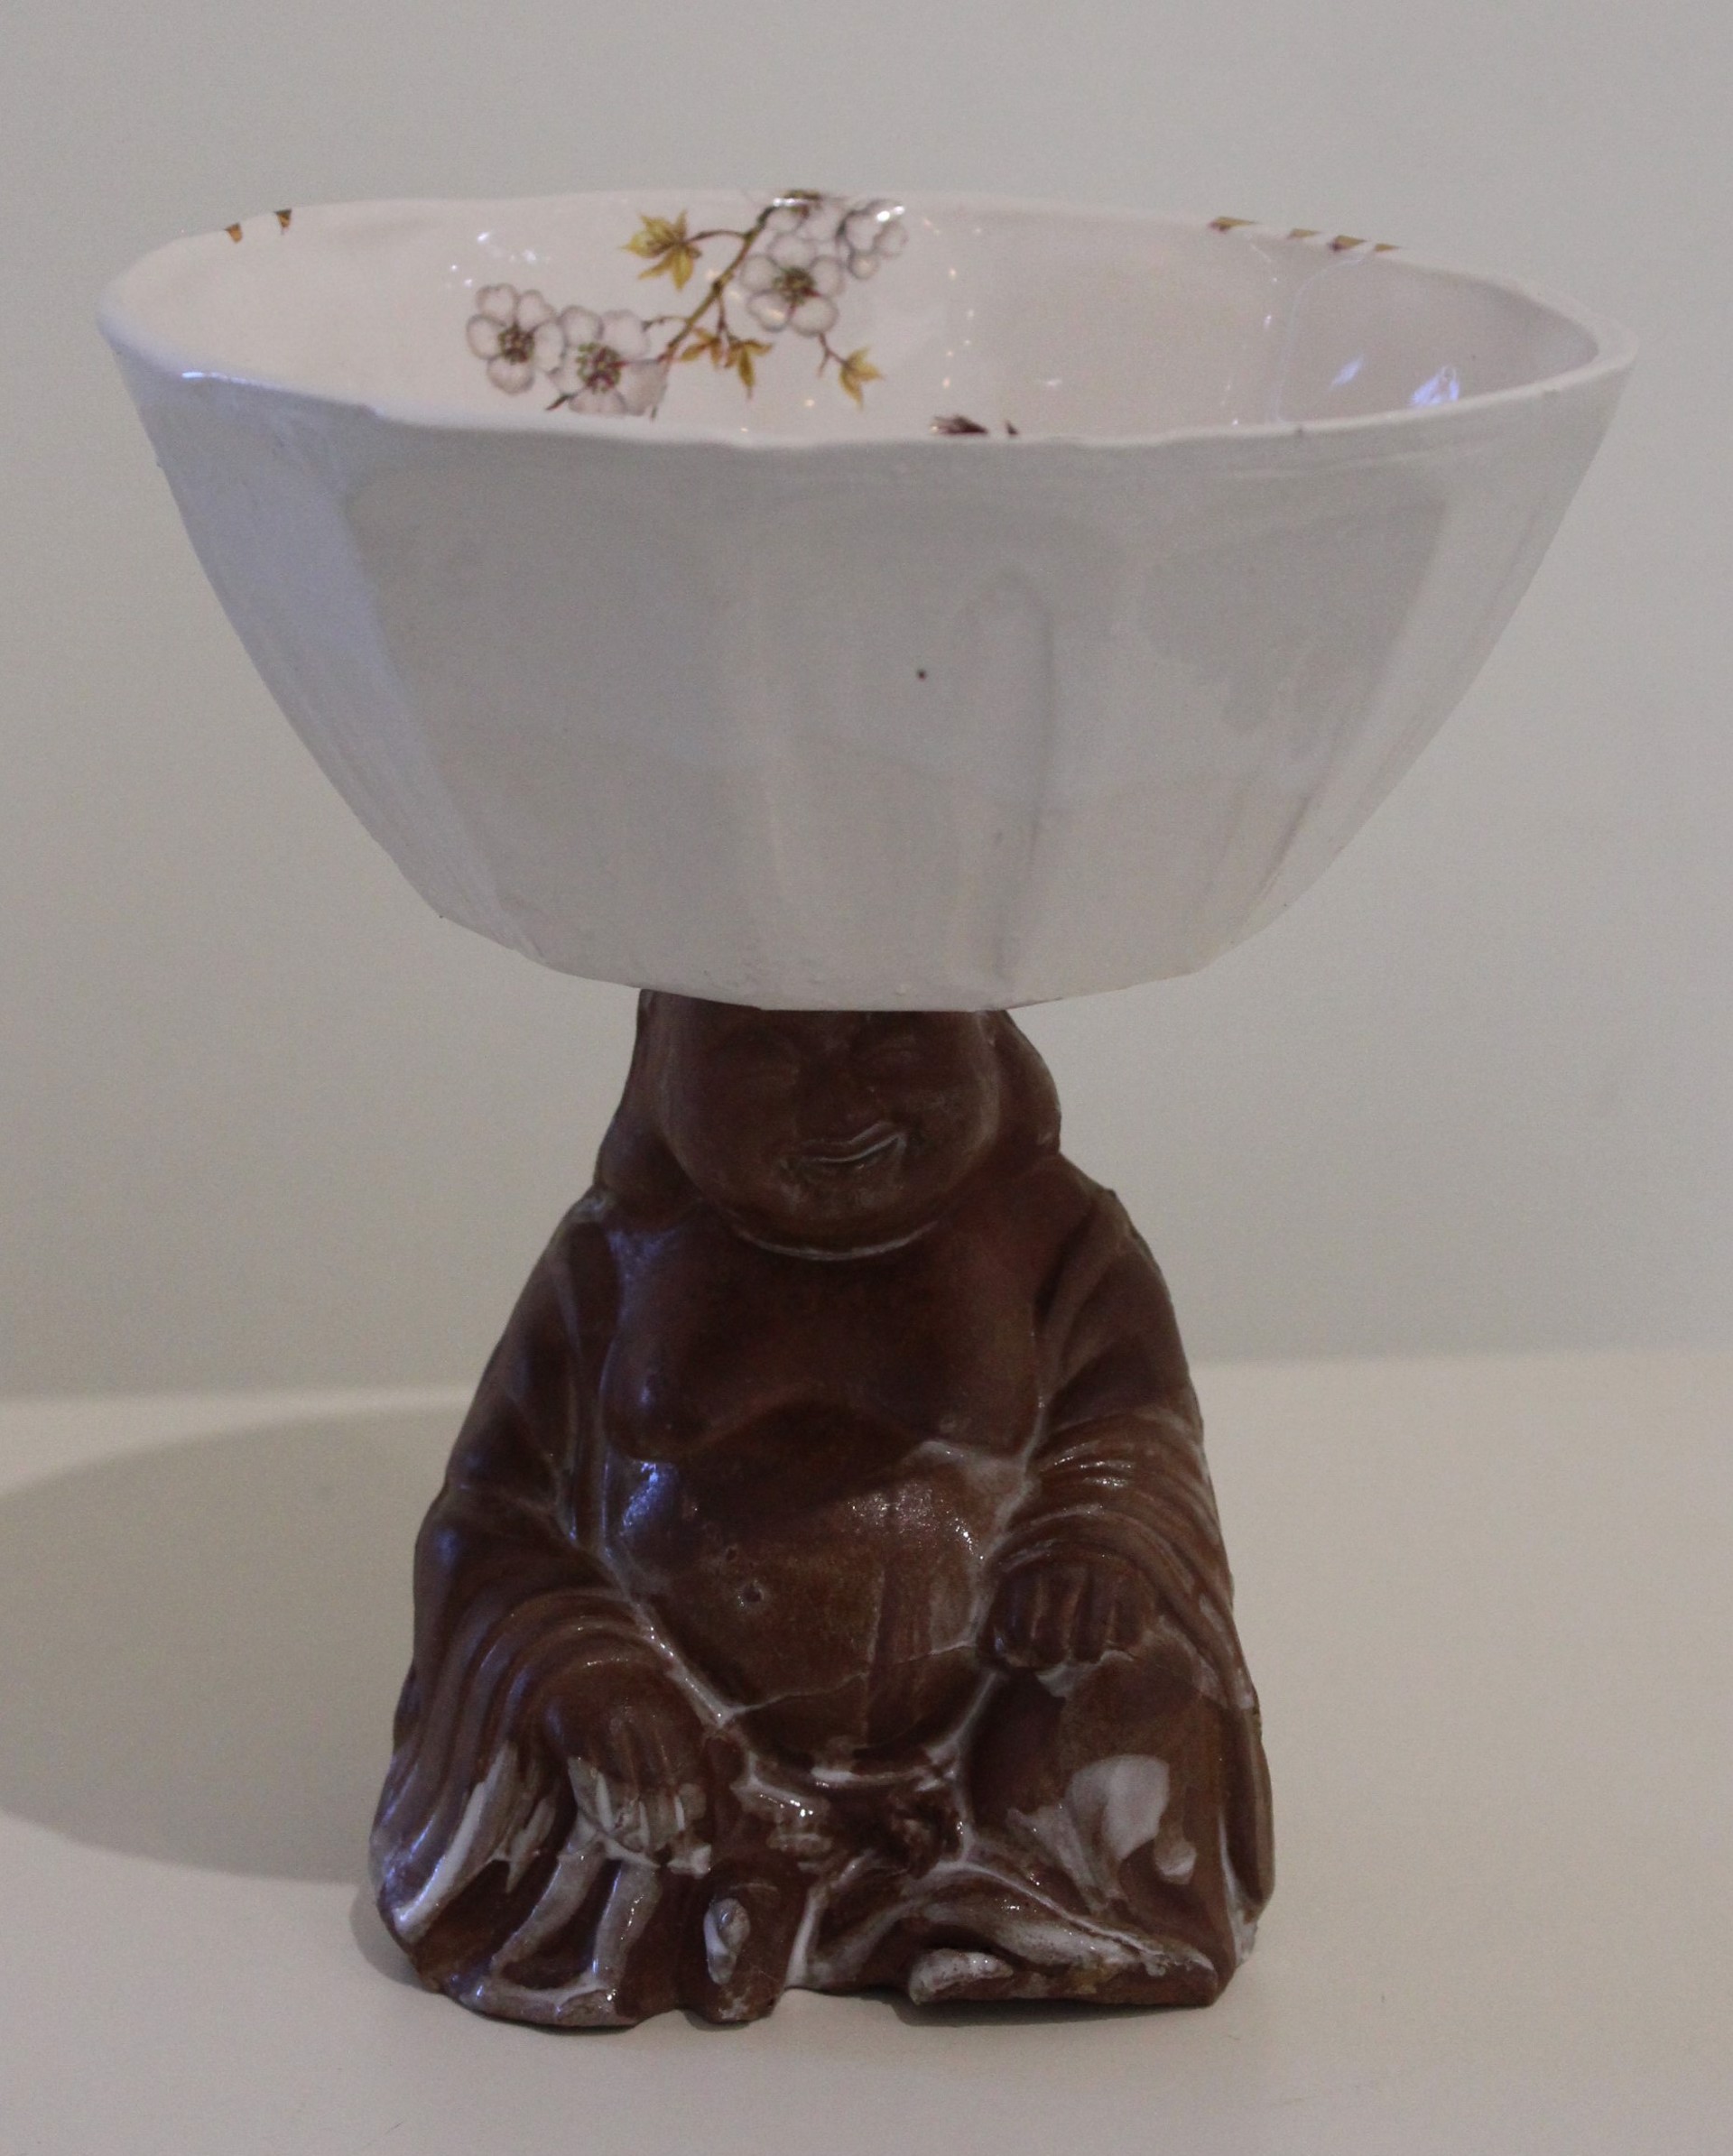 Buddha Bowl 2 (bird) by Therese Knowles